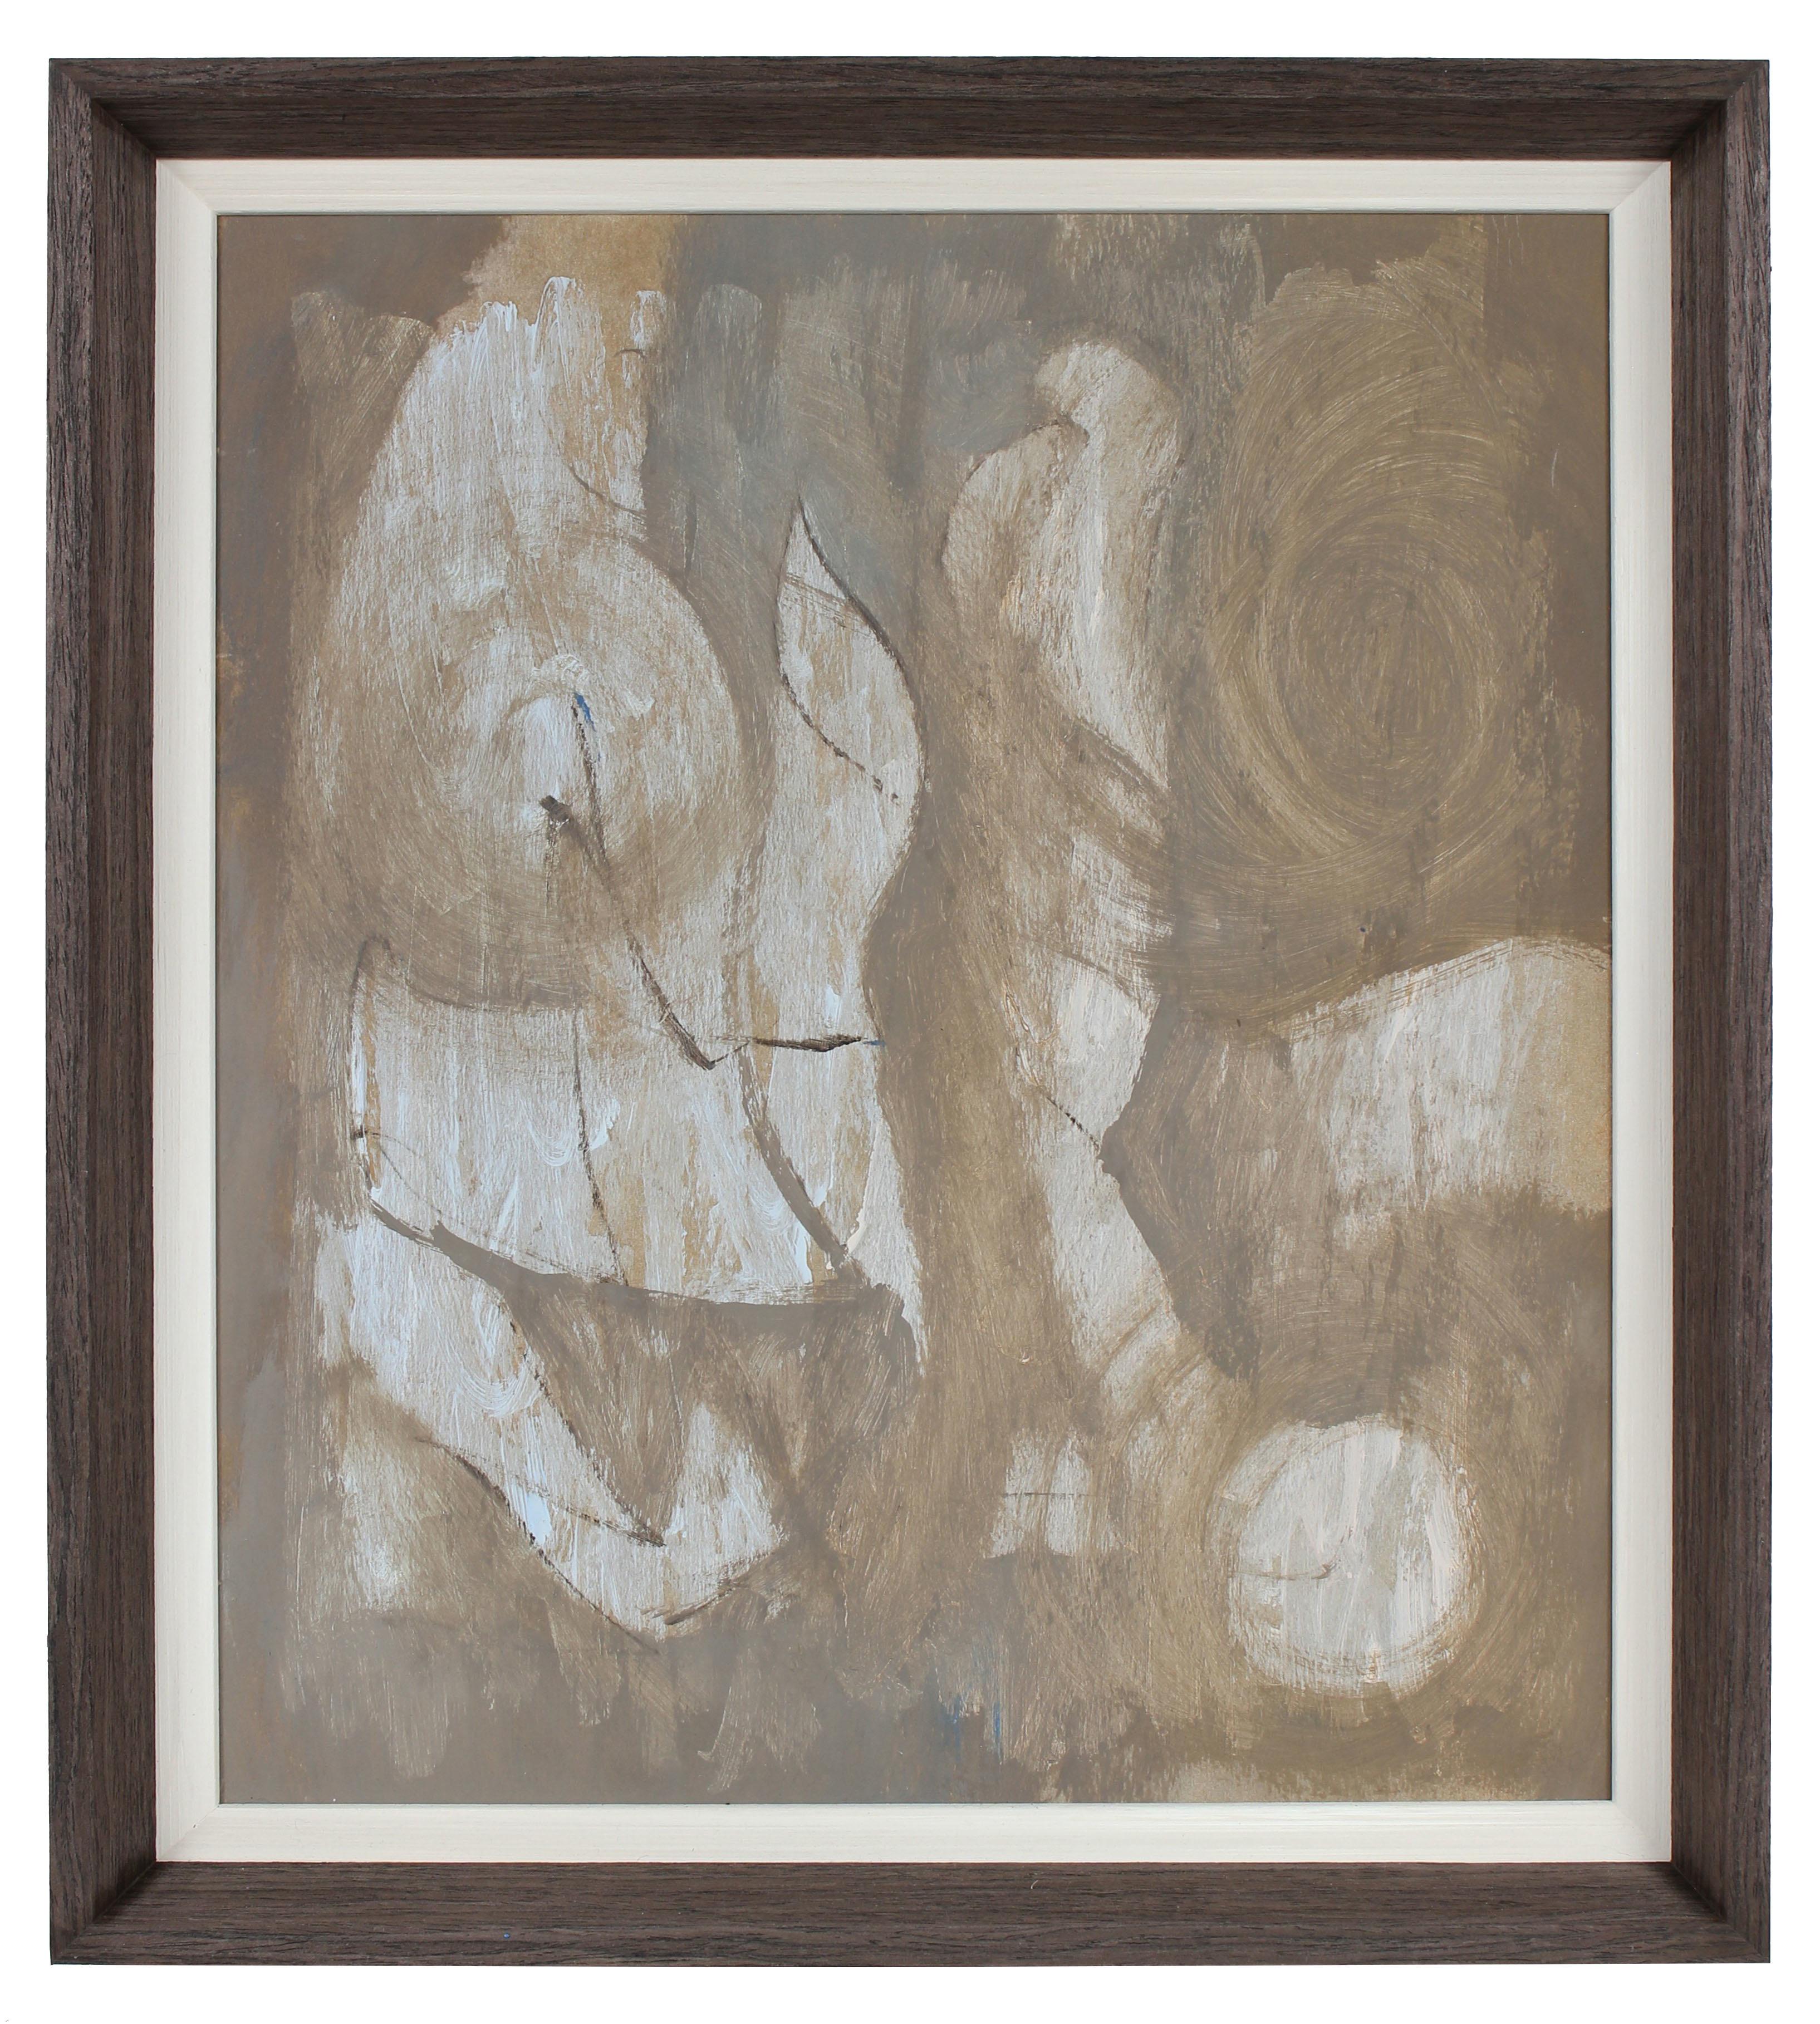 This circa late 1950s Modernist Abstract oil on wood panel textured painting in taupe, brown and gray is by Bay Area painter, printmaker, and designer Calvin Anderson (b. 1925).  He studied at the California College of the Arts and Art Center